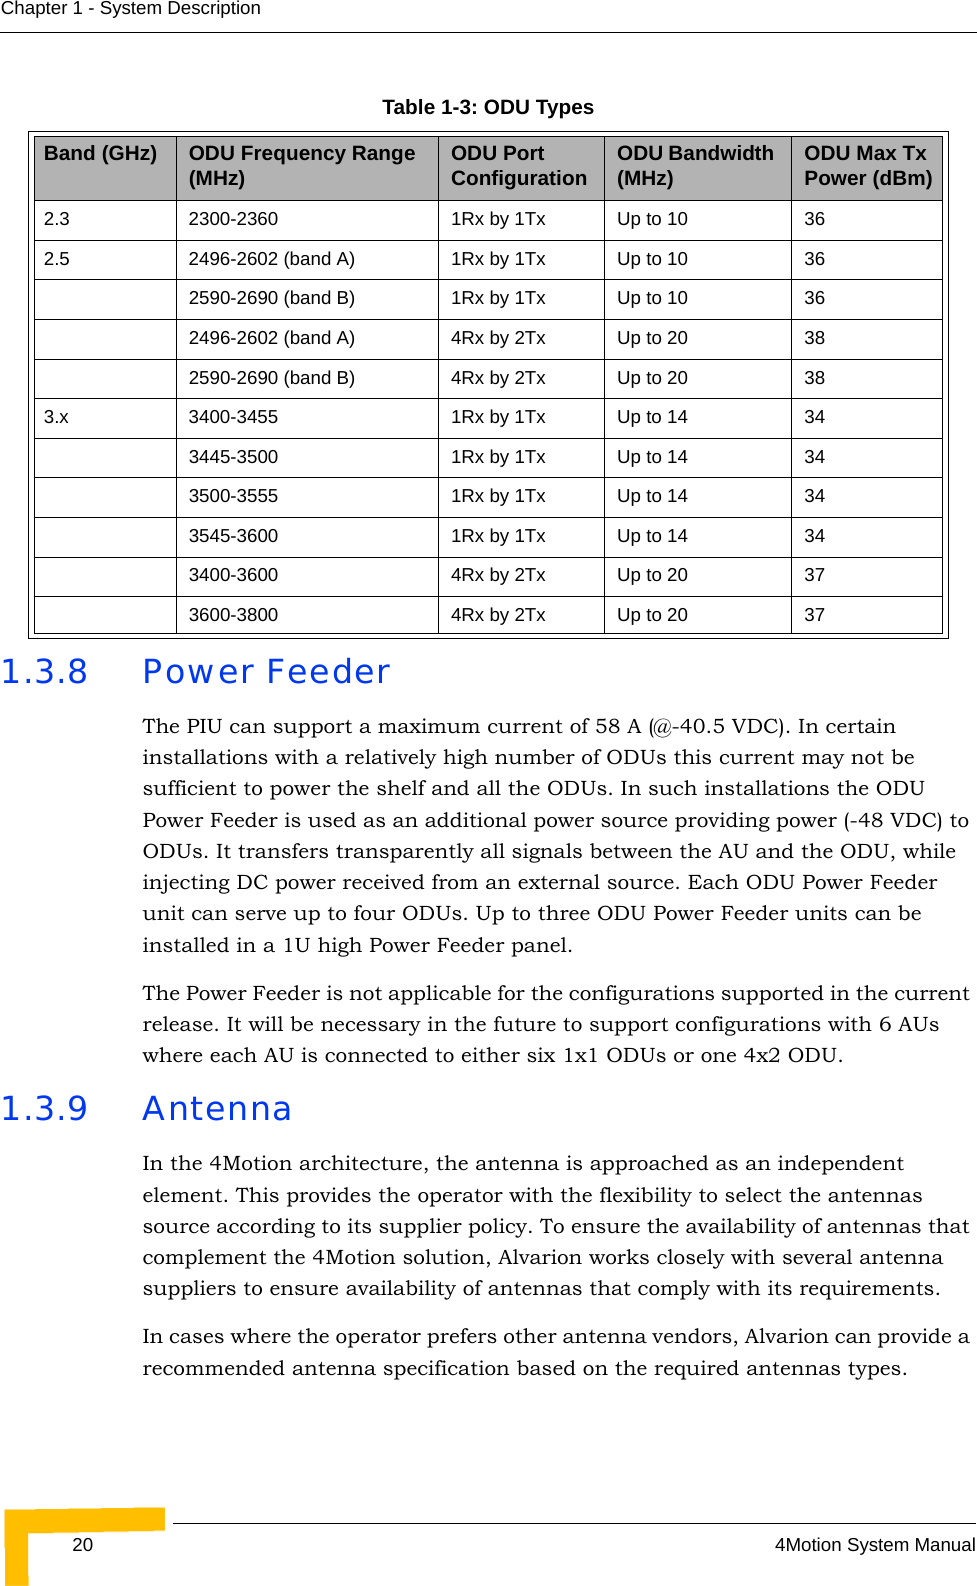 20 4Motion System ManualChapter 1 - System Description1.3.8 Power FeederThe PIU can support a maximum current of 58 A (@-40.5 VDC). In certain installations with a relatively high number of ODUs this current may not be sufficient to power the shelf and all the ODUs. In such installations the ODU Power Feeder is used as an additional power source providing power (-48 VDC) to ODUs. It transfers transparently all signals between the AU and the ODU, while injecting DC power received from an external source. Each ODU Power Feeder unit can serve up to four ODUs. Up to three ODU Power Feeder units can be installed in a 1U high Power Feeder panel.The Power Feeder is not applicable for the configurations supported in the current release. It will be necessary in the future to support configurations with 6 AUs where each AU is connected to either six 1x1 ODUs or one 4x2 ODU.1.3.9 AntennaIn the 4Motion architecture, the antenna is approached as an independent element. This provides the operator with the flexibility to select the antennas source according to its supplier policy. To ensure the availability of antennas that complement the 4Motion solution, Alvarion works closely with several antenna suppliers to ensure availability of antennas that comply with its requirements.In cases where the operator prefers other antenna vendors, Alvarion can provide a recommended antenna specification based on the required antennas types.Table 1-3: ODU TypesBand (GHz) ODU Frequency Range (MHz) ODU Port Configuration ODU Bandwidth (MHz) ODU Max Tx Power (dBm)2.3 2300-2360 1Rx by 1Tx Up to 10 362.5 2496-2602 (band A) 1Rx by 1Tx Up to 10 362590-2690 (band B) 1Rx by 1Tx Up to 10 362496-2602 (band A) 4Rx by 2Tx Up to 20 382590-2690 (band B) 4Rx by 2Tx Up to 20 383.x 3400-3455 1Rx by 1Tx Up to 14 343445-3500 1Rx by 1Tx Up to 14 343500-3555 1Rx by 1Tx Up to 14 343545-3600 1Rx by 1Tx Up to 14 343400-3600 4Rx by 2Tx Up to 20 373600-3800 4Rx by 2Tx Up to 20 37